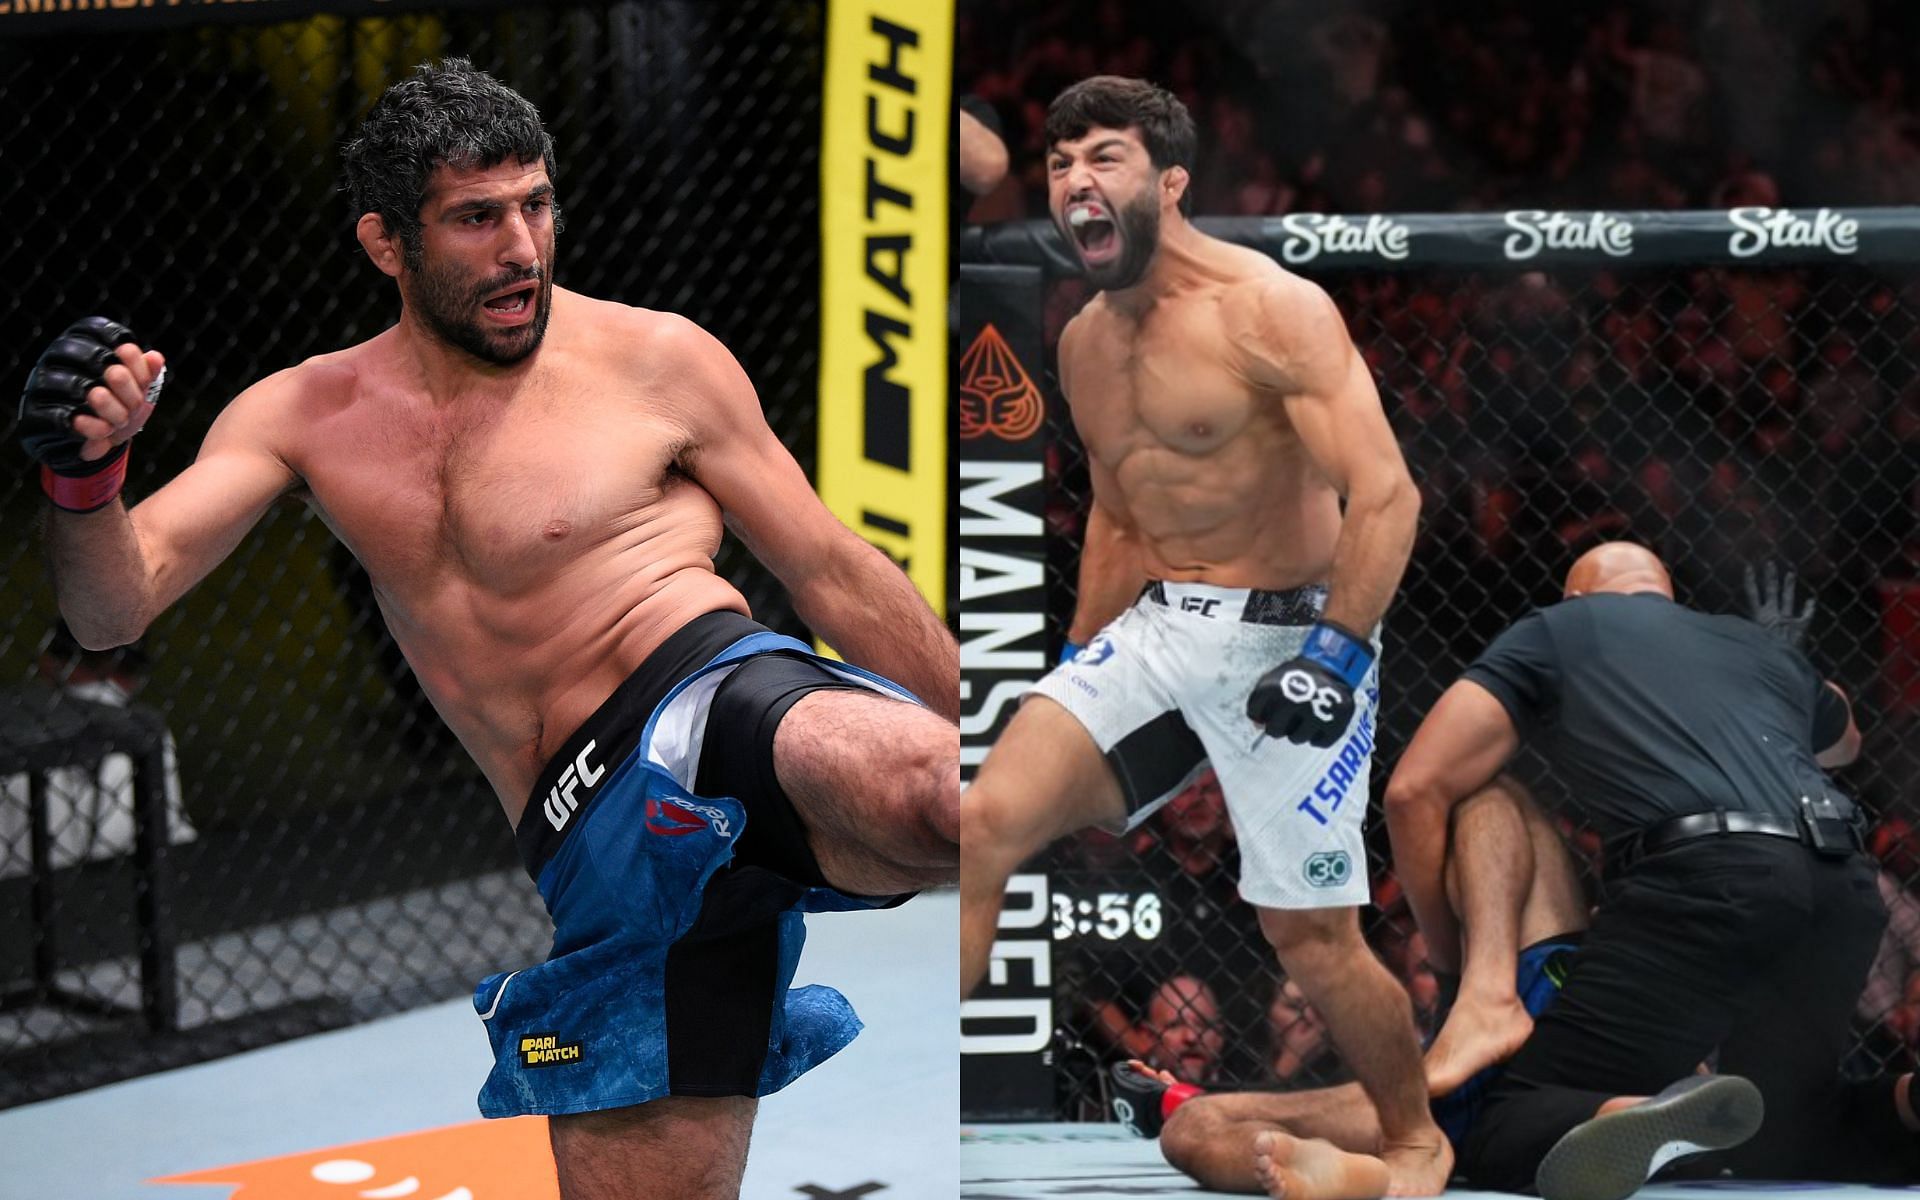 Beneil Dariush (left) was knocked out by Arman Tsarukyan (right) [Images courtesy: Getty Images and @ufc on Twitter/X]